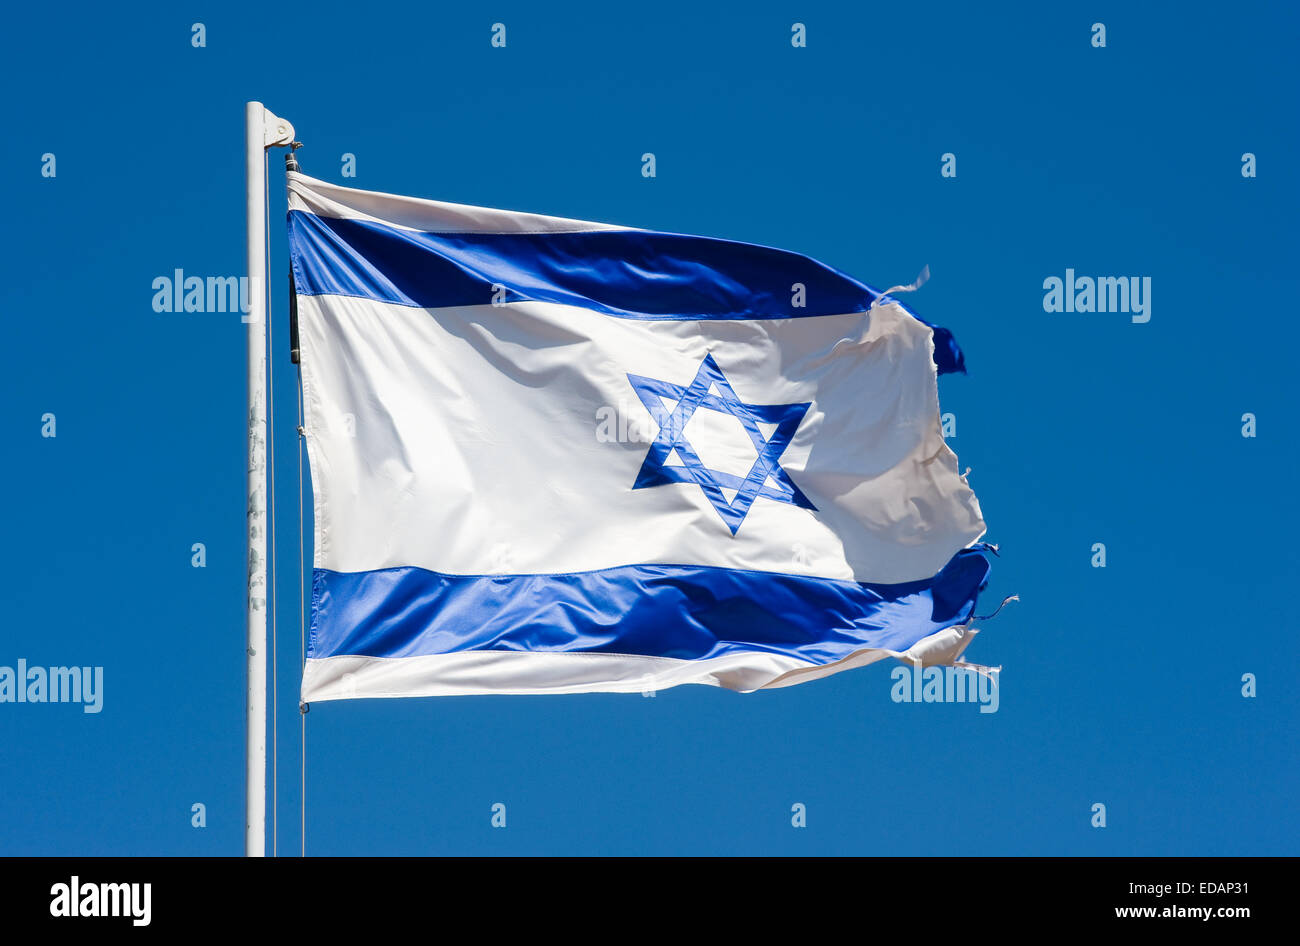 The Israelian flag waving in the wind Stock Photo